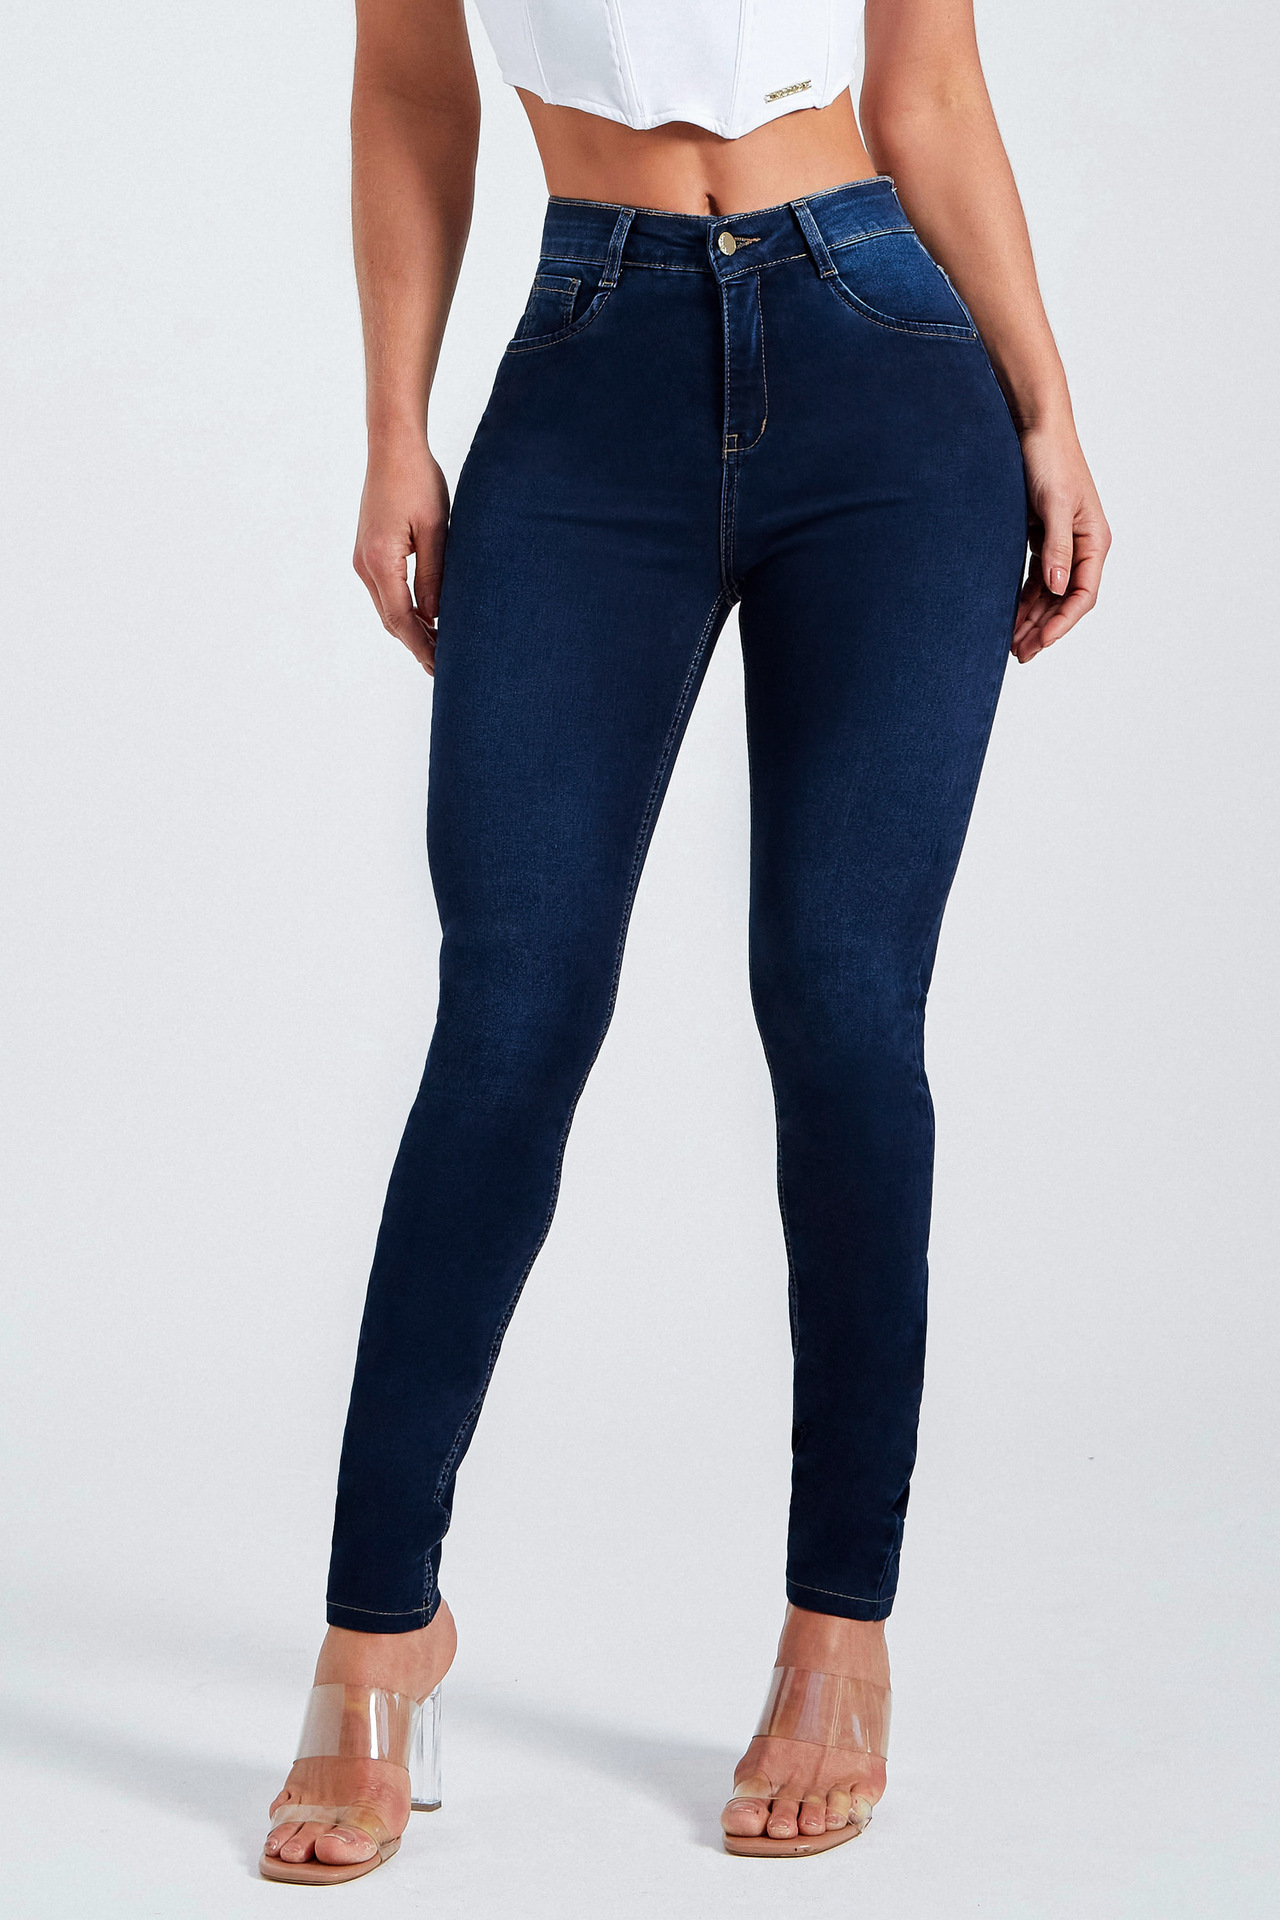 Jeans - Wholesale Clothing Vendors - Clothing Supplier